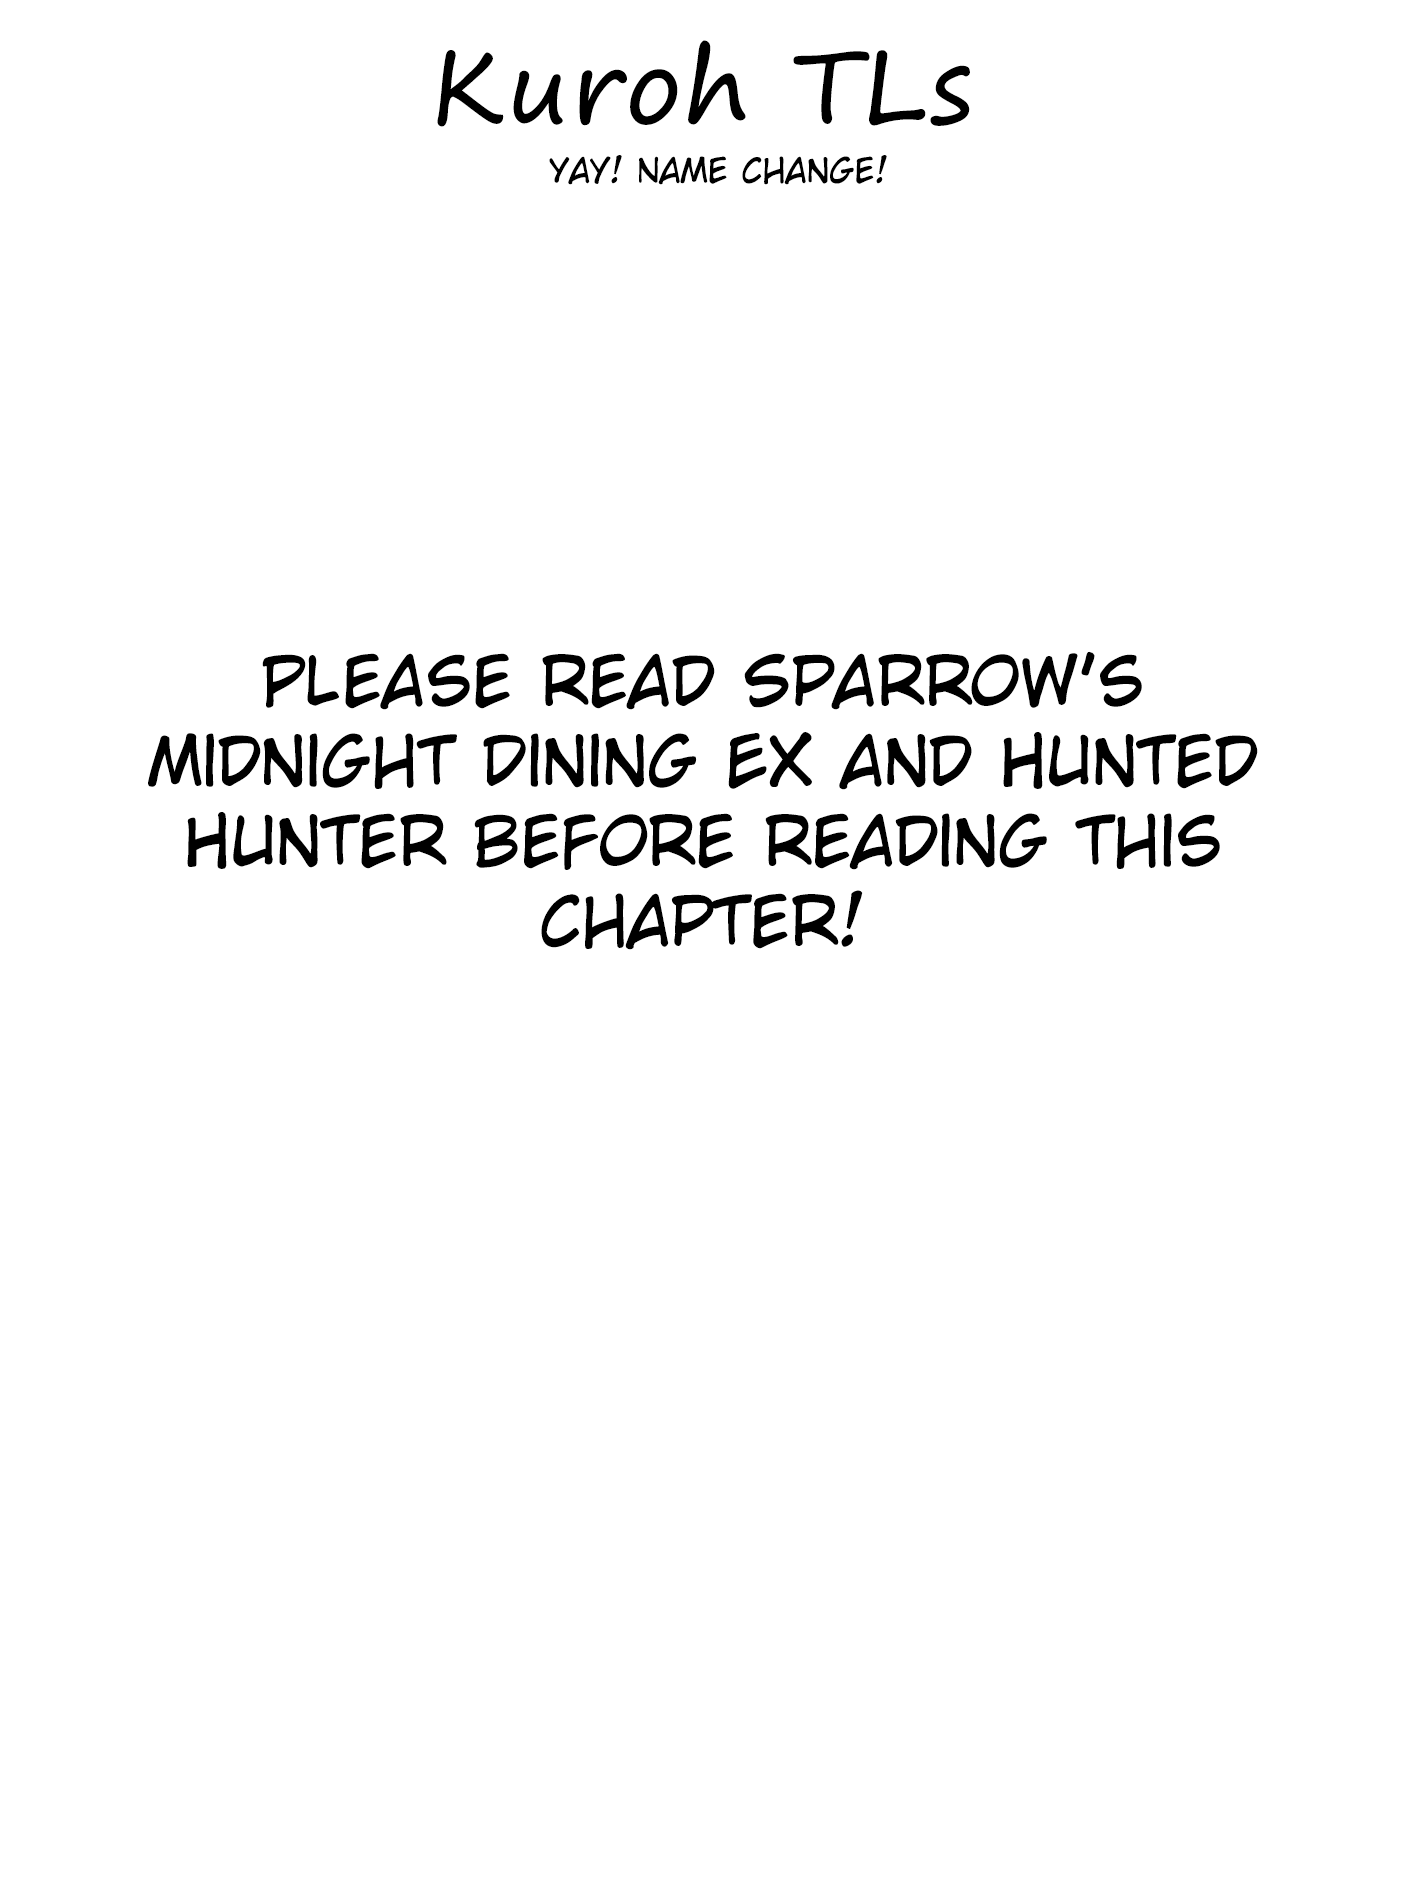 Touhou - The Sparrow's Midnight Dining (Doujinshi) Vol.4 Chapter 12.5: Special Episode: Sparrow's Midnight Dining - Picture 1